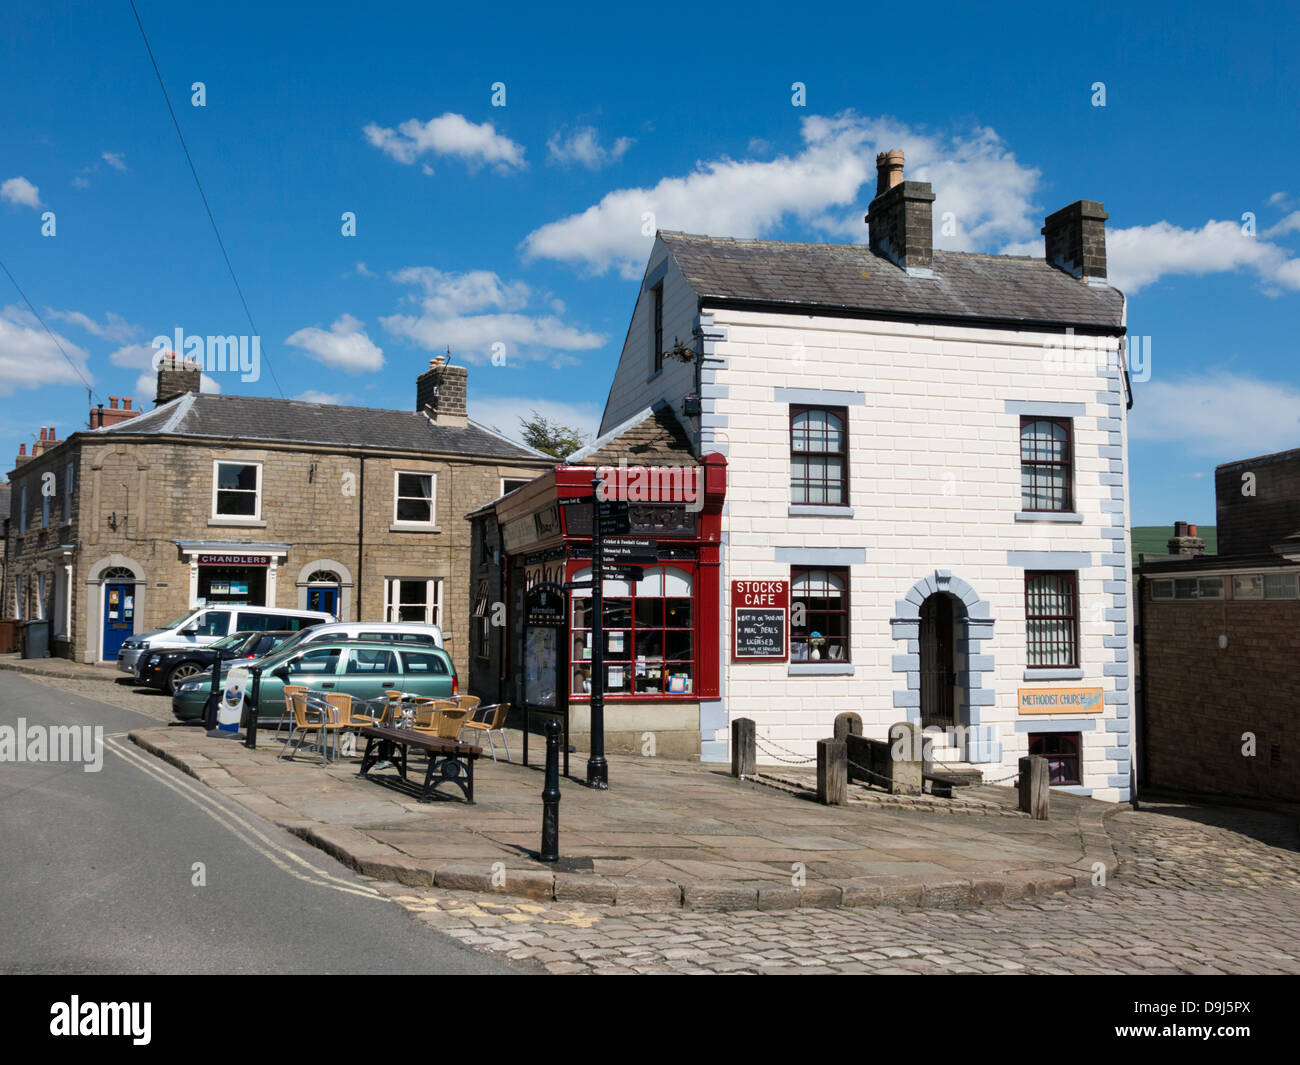 Rows of cottages and tea room  in Chapel-en-le-Frith  a small town  in Derbyshire, England Stock Photo